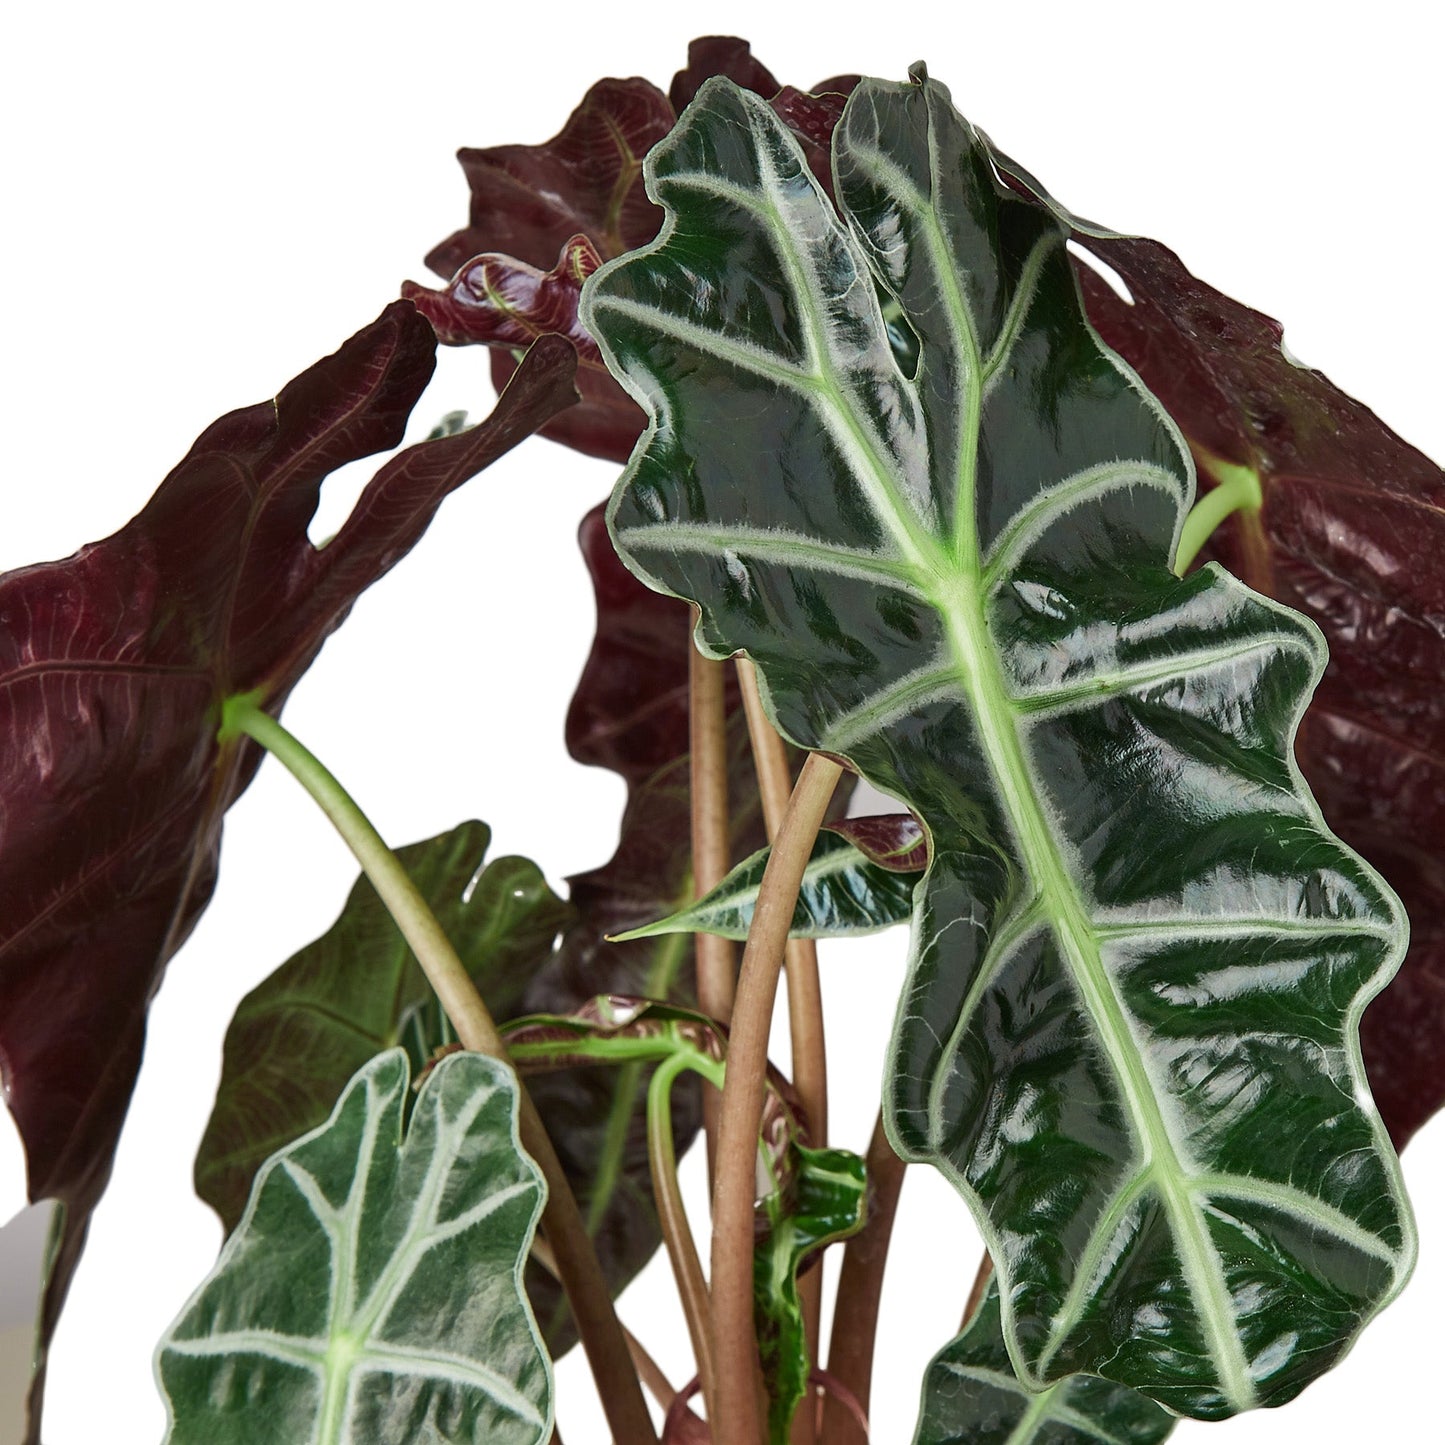 Alien Elegance: Alocasia Polly 'African Mask' - Exotic Indoor Plant with Striking Veined Leaves